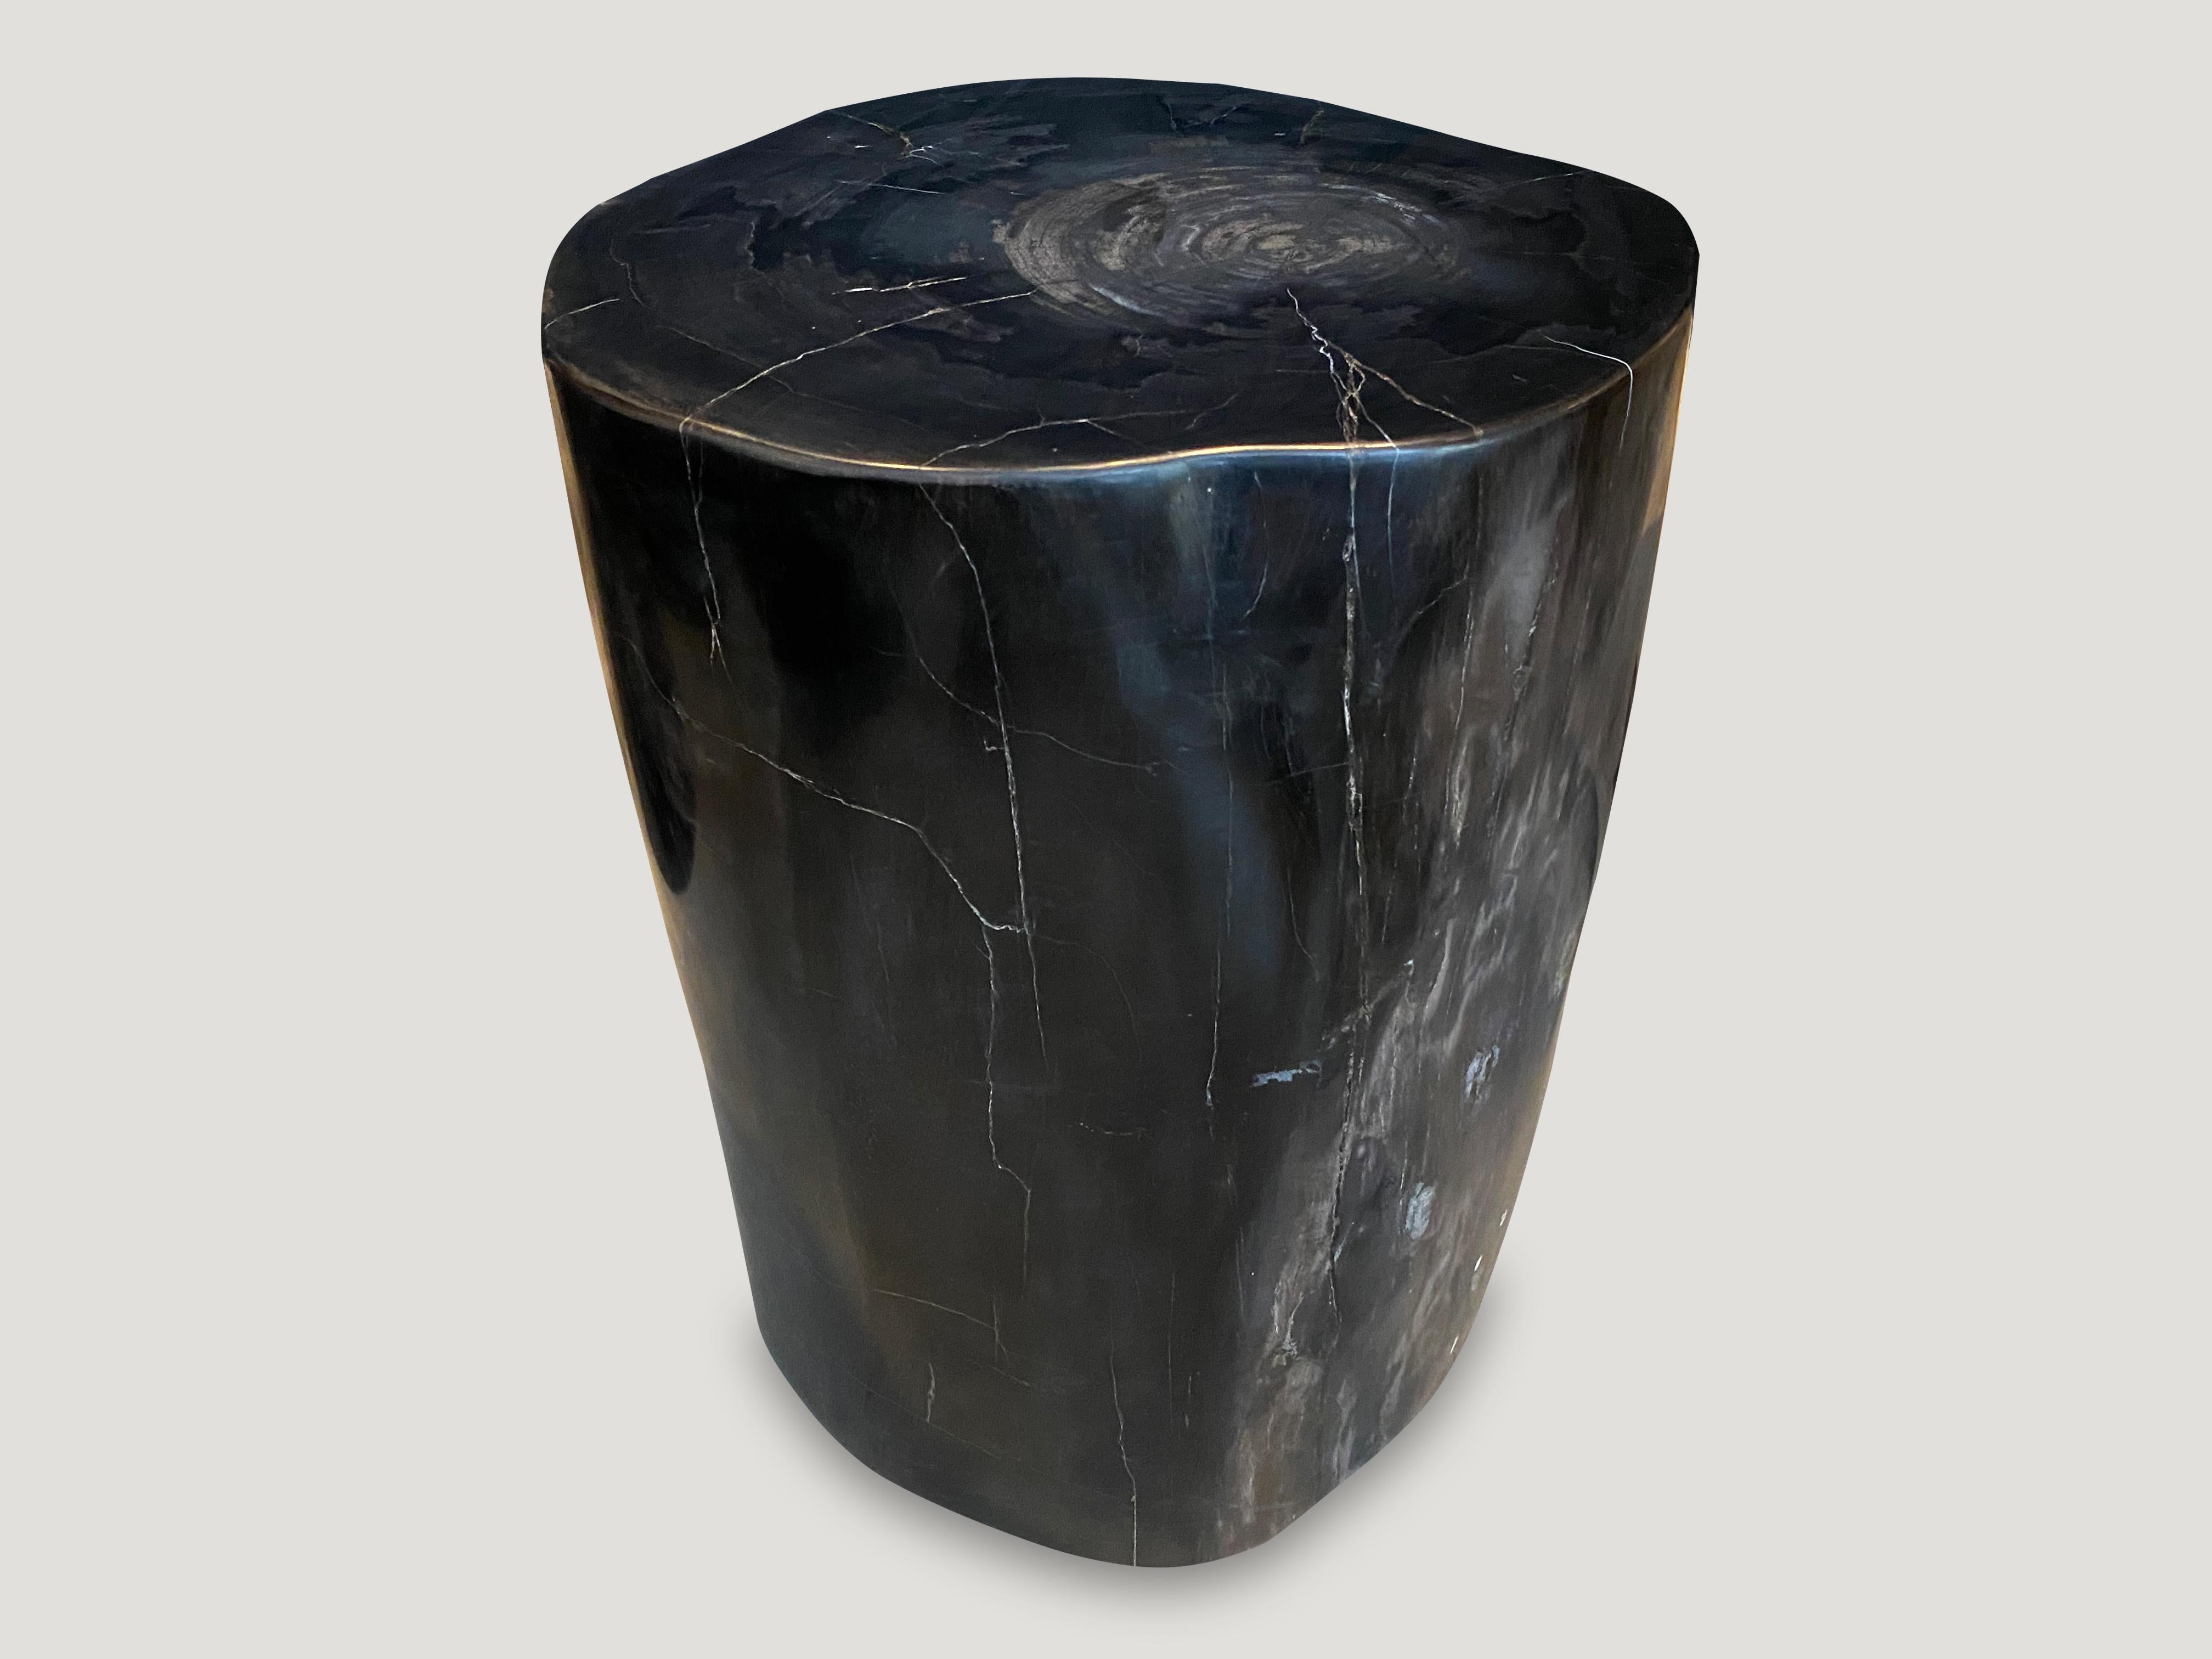 Impressive high quality petrified wood side table with striking contrasting markings. It’s fascinating how Mother Nature produces these stunning 40 million year old petrified teak logs with such contrasting and natural patterns throughout. Modern